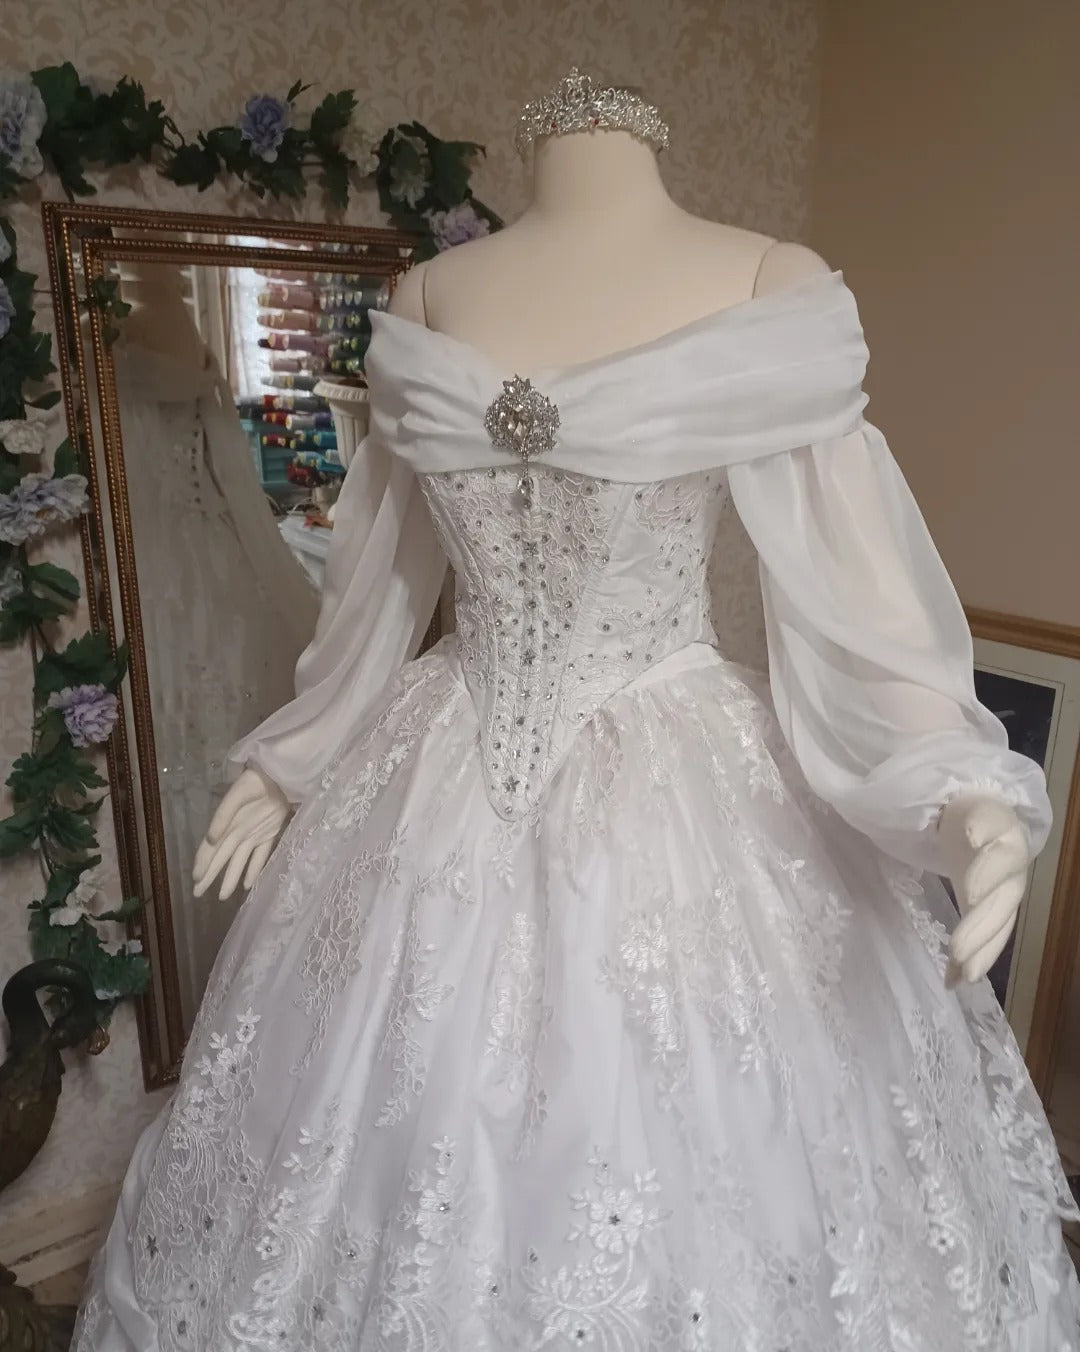 White Victorian Belle Style Gown with Rhinestones and Stars